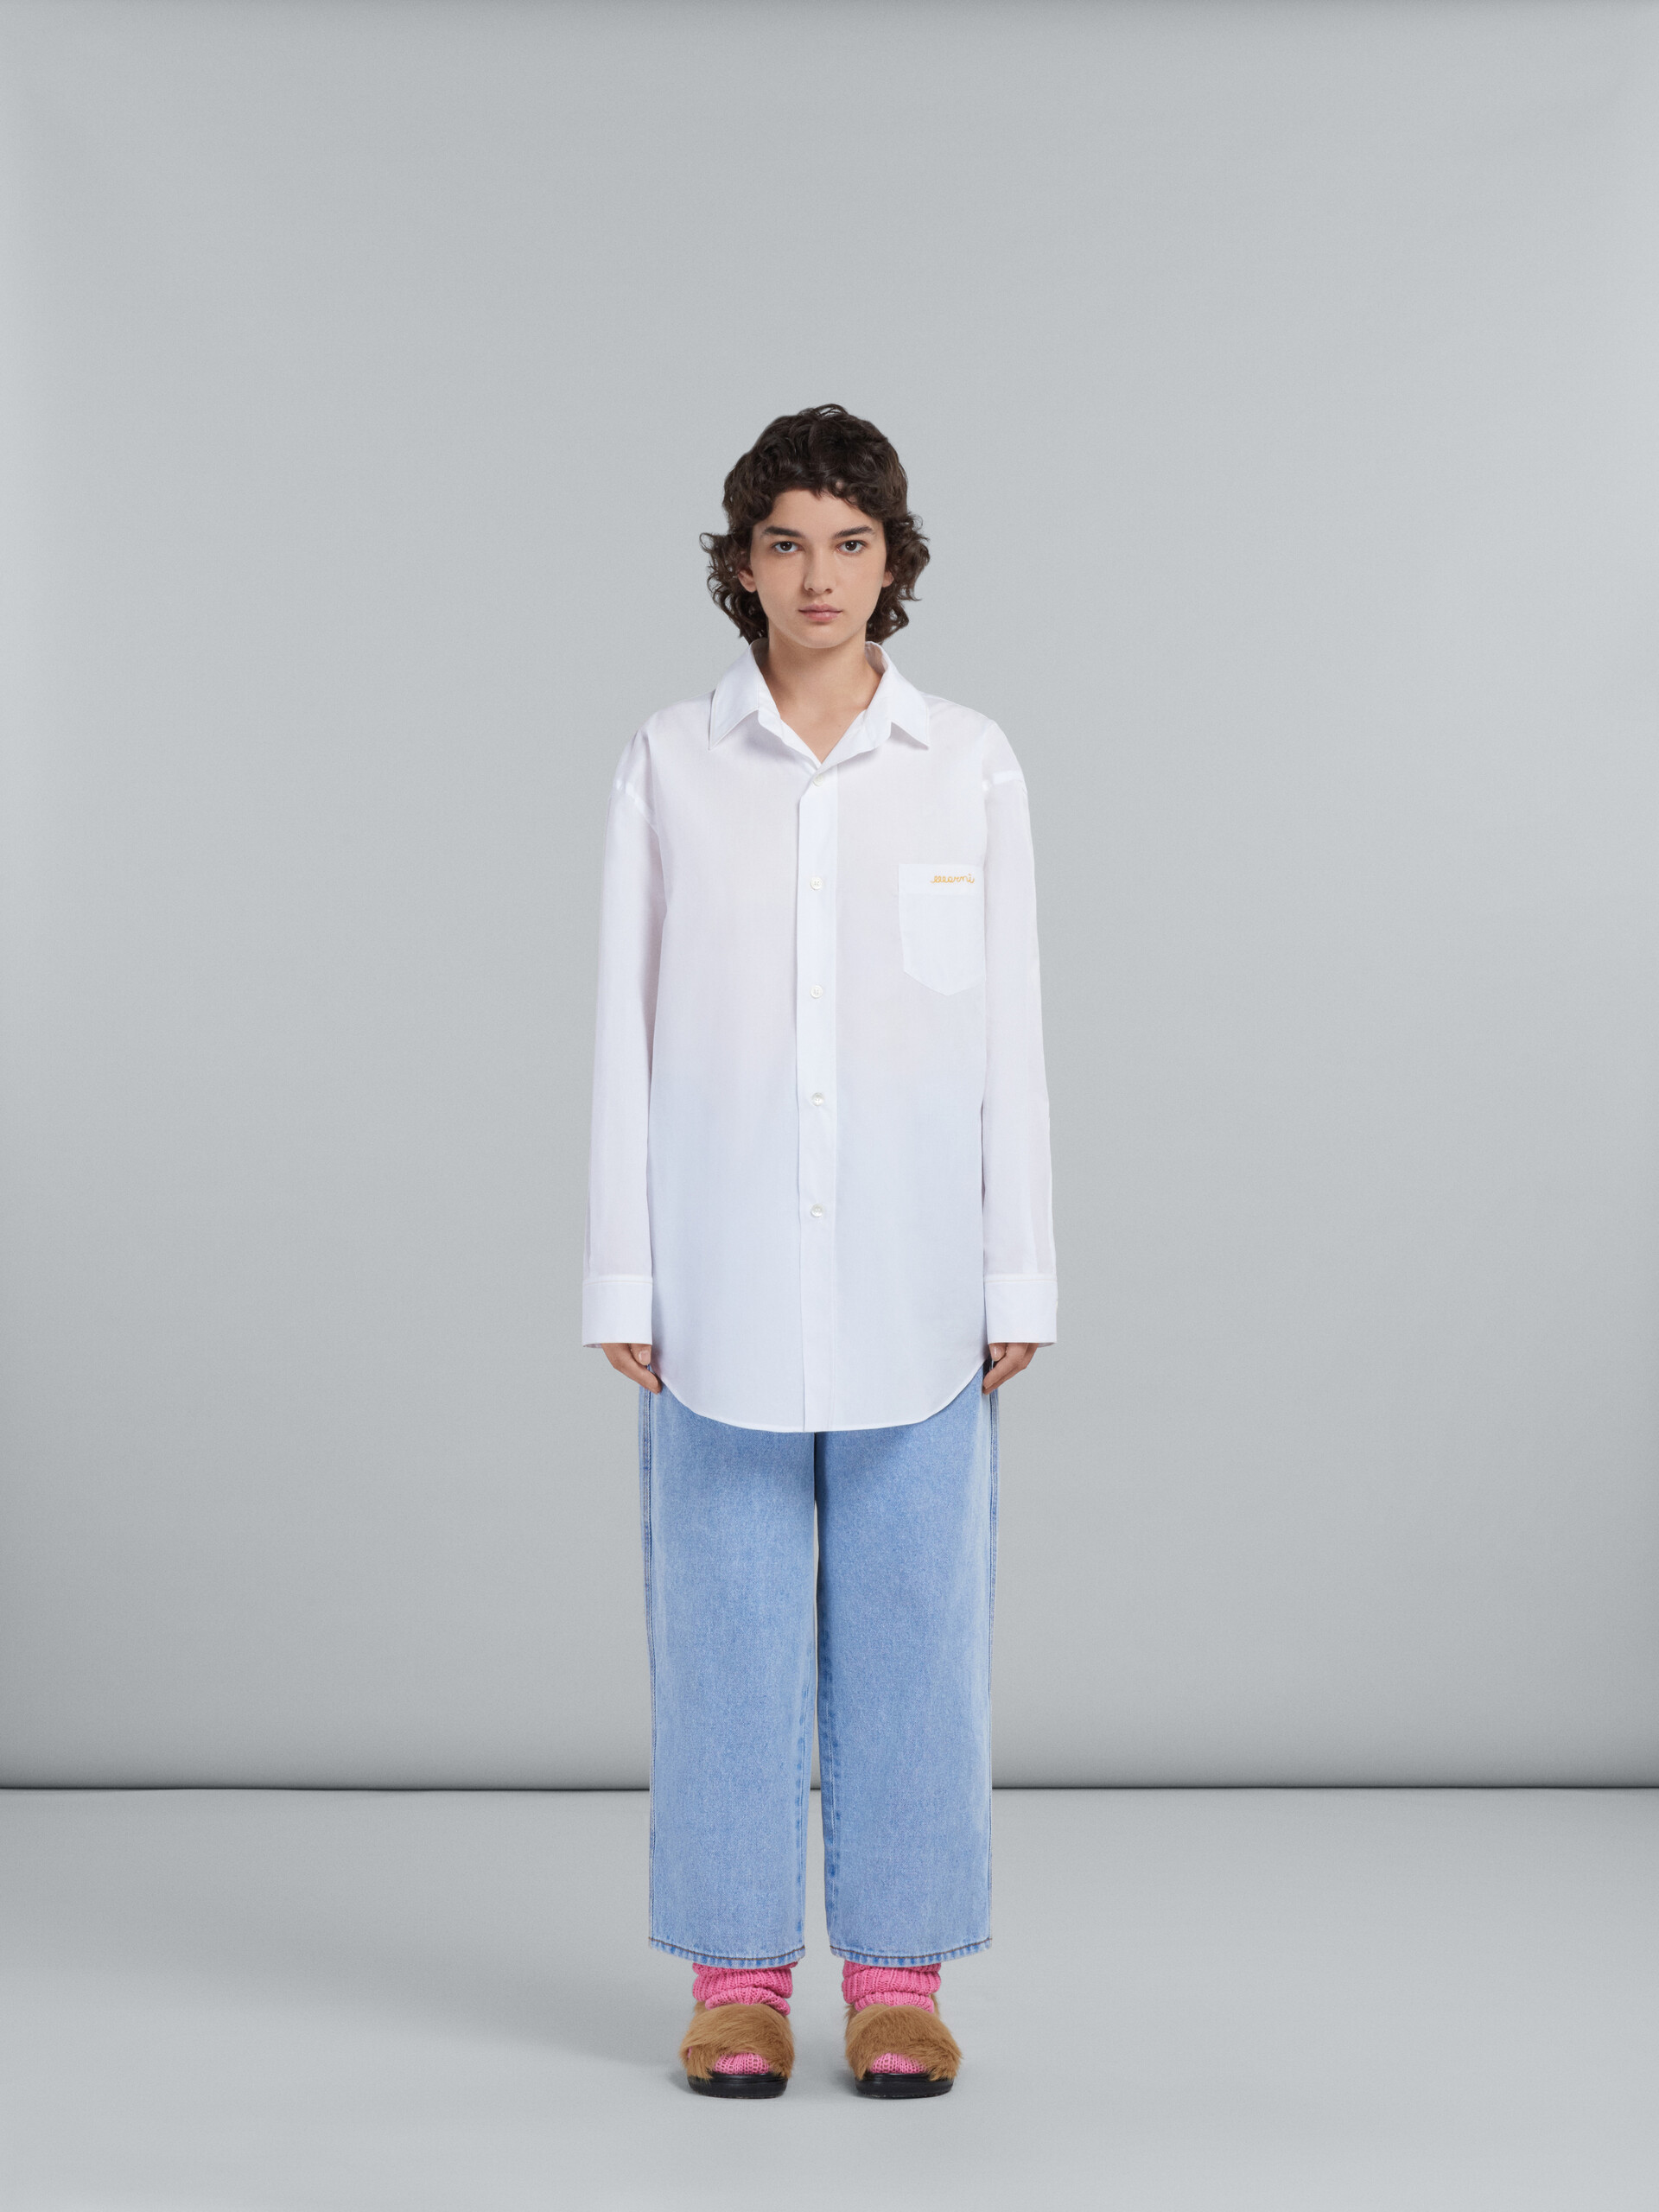 Loose trousers in light blue denim with embroidery - Pants - Image 2